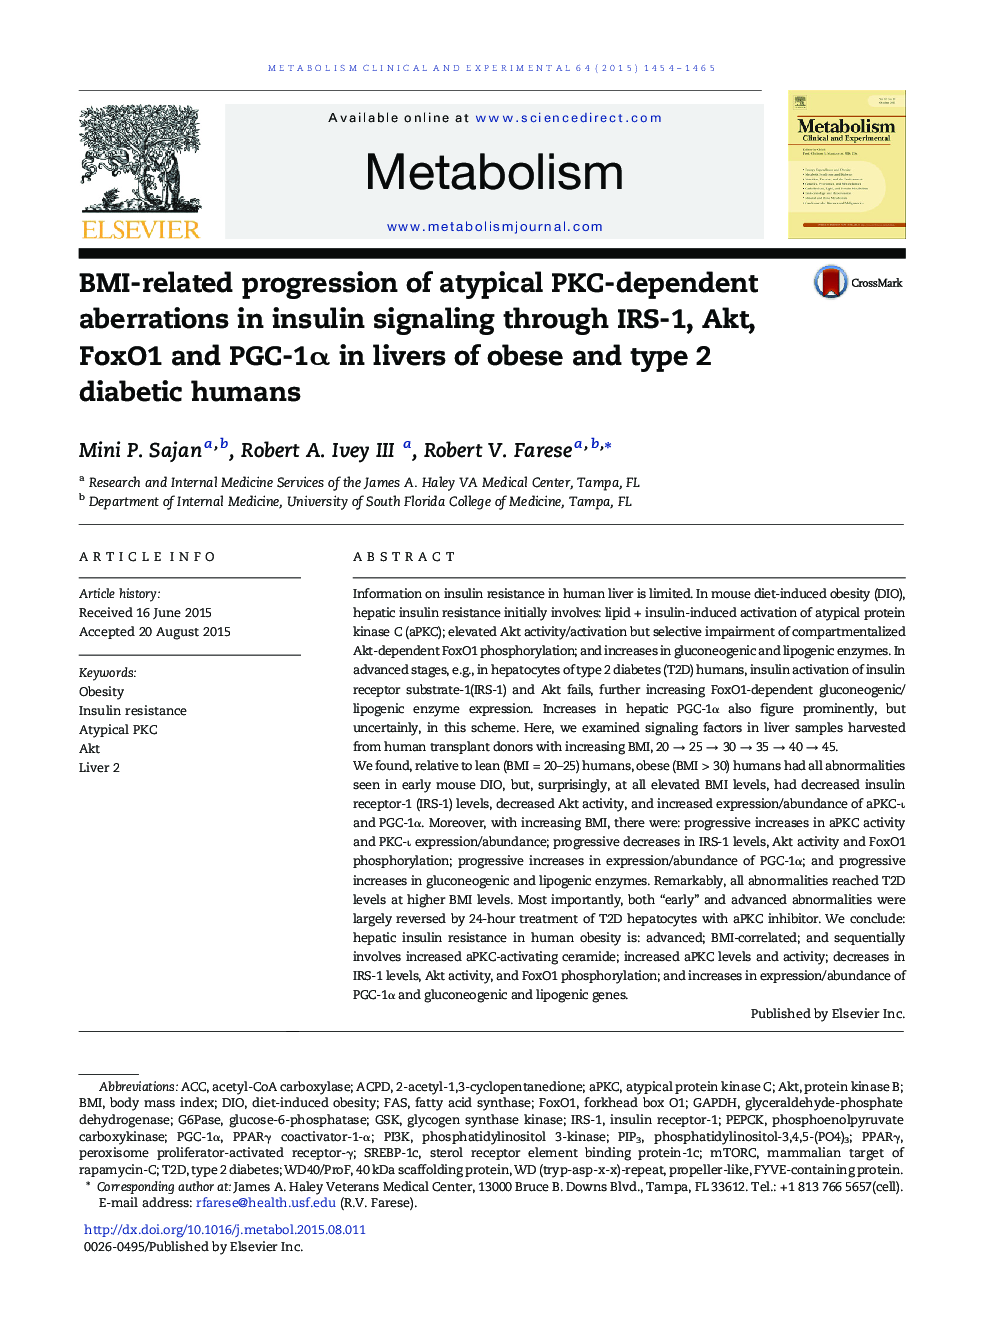 BMI-related progression of atypical PKC-dependent aberrations in insulin signaling through IRS-1, Akt, FoxO1 and PGC-1α in livers of obese and type 2 diabetic humans